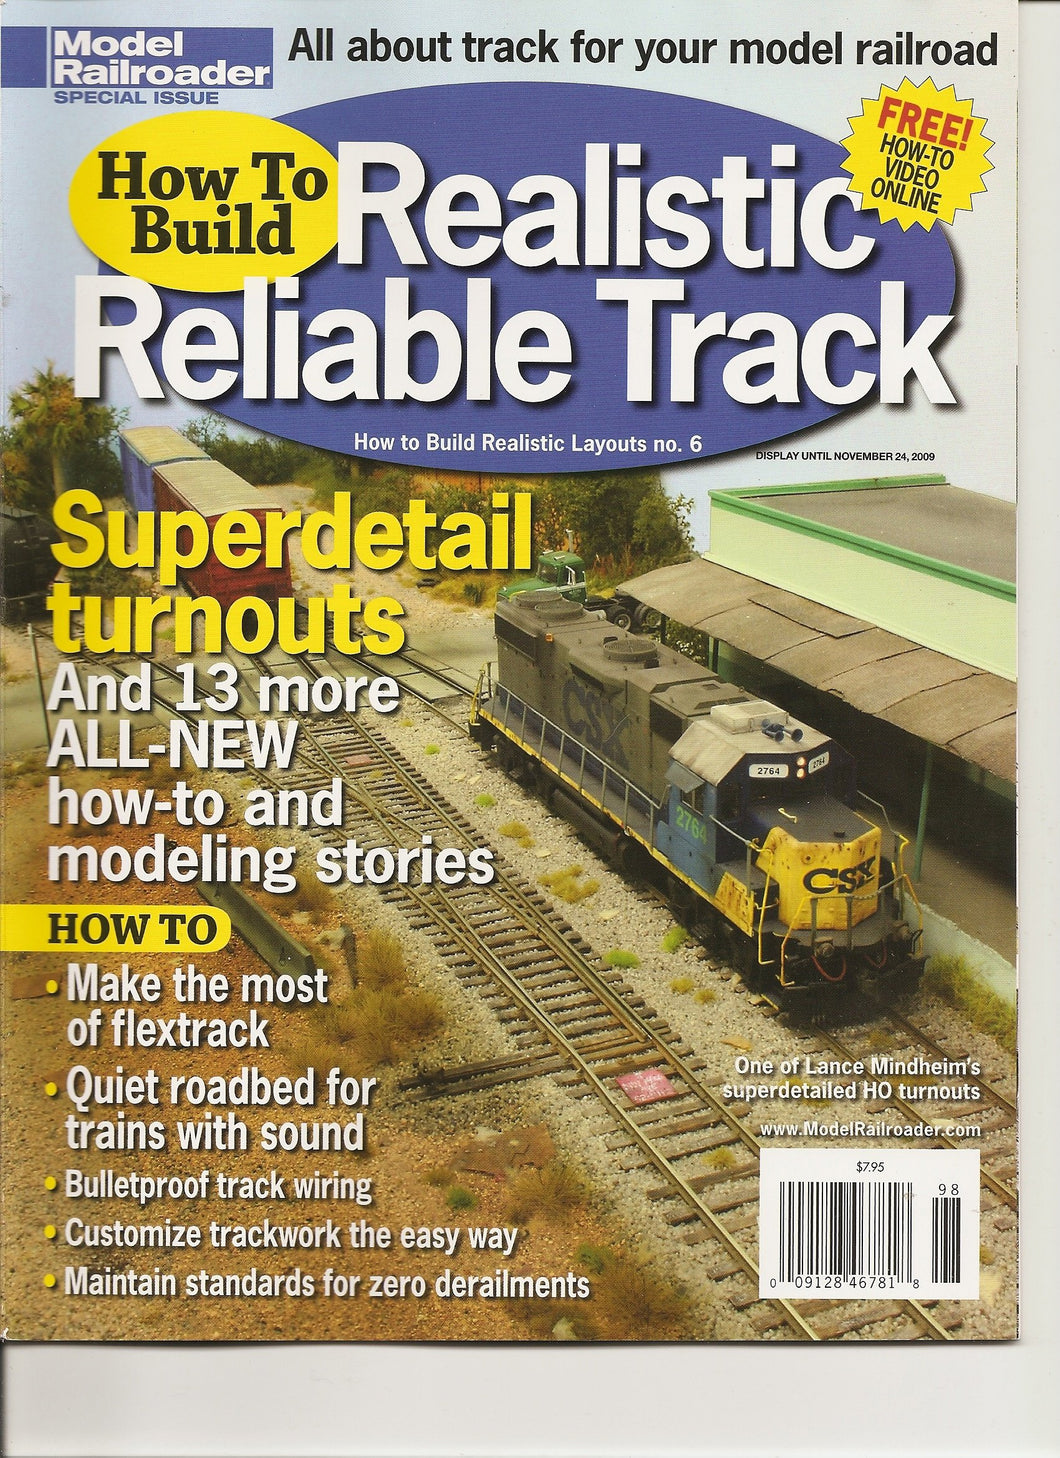 Model Railroader How to Build Realistic Reliable Track November 2009 Single Issu